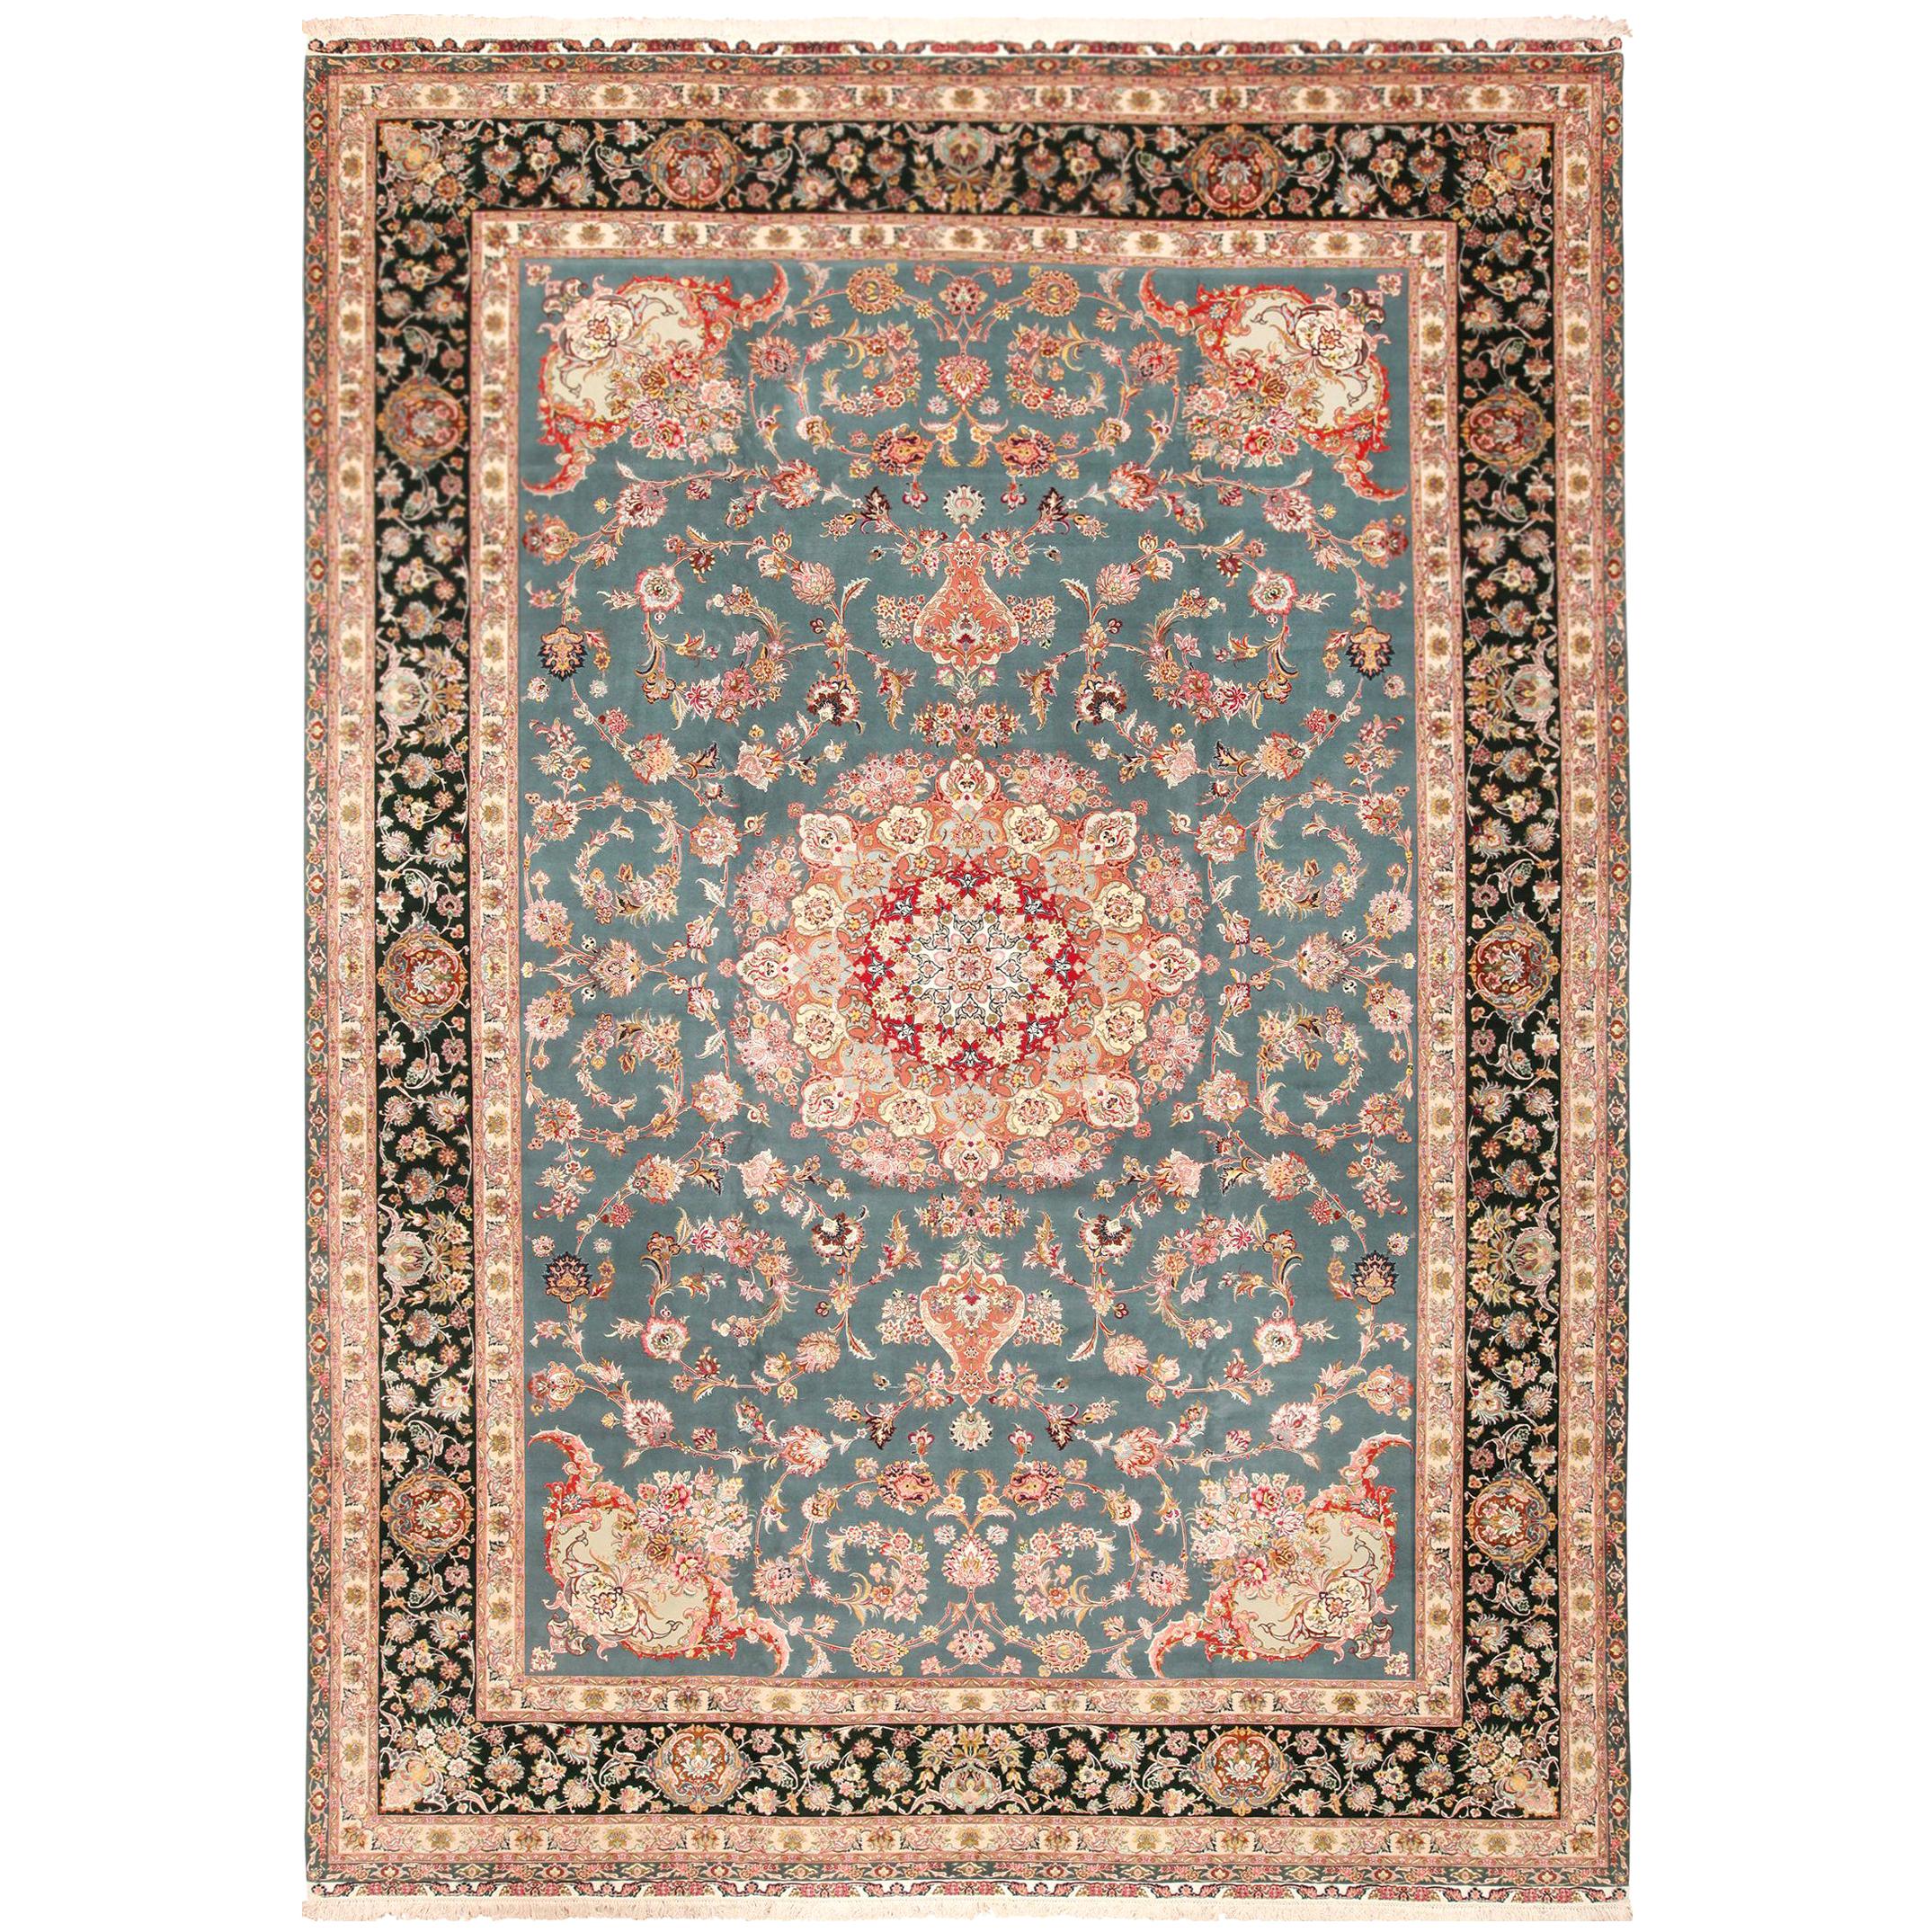 Nazmiyal Collection Vintage Tabriz Persian Rug. Size: 11 ft 6 in x 17 ft 1 in 